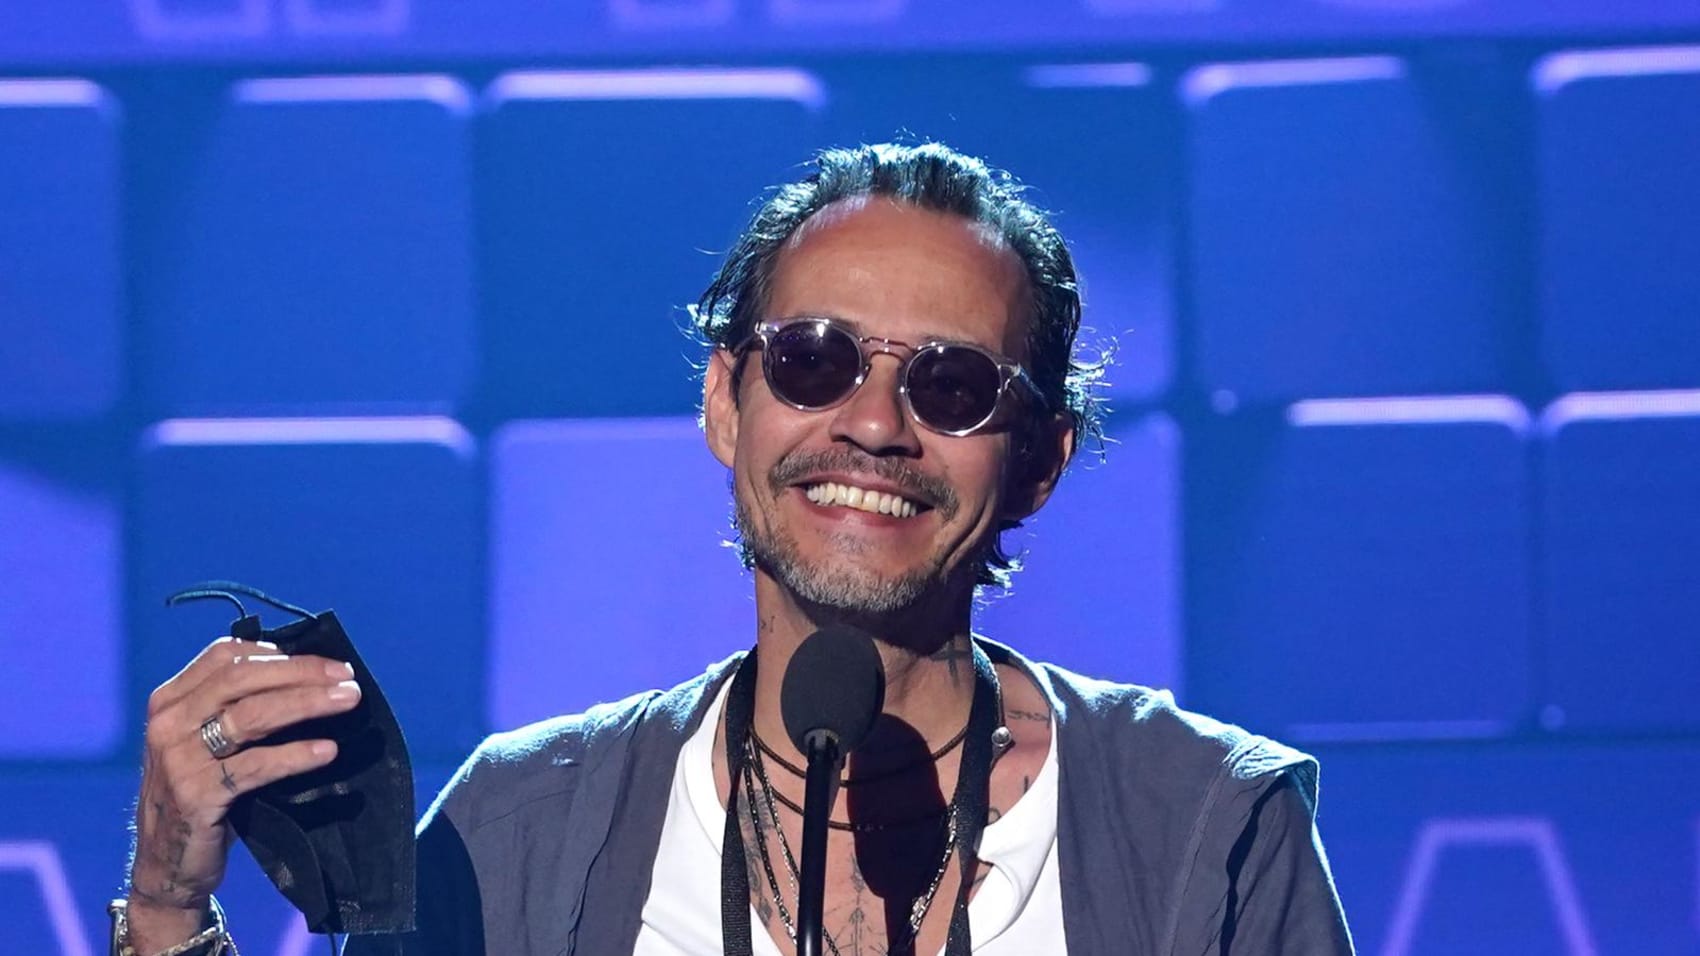 Marc Anthony Concert | Live Stream, Date, Location and Tickets info